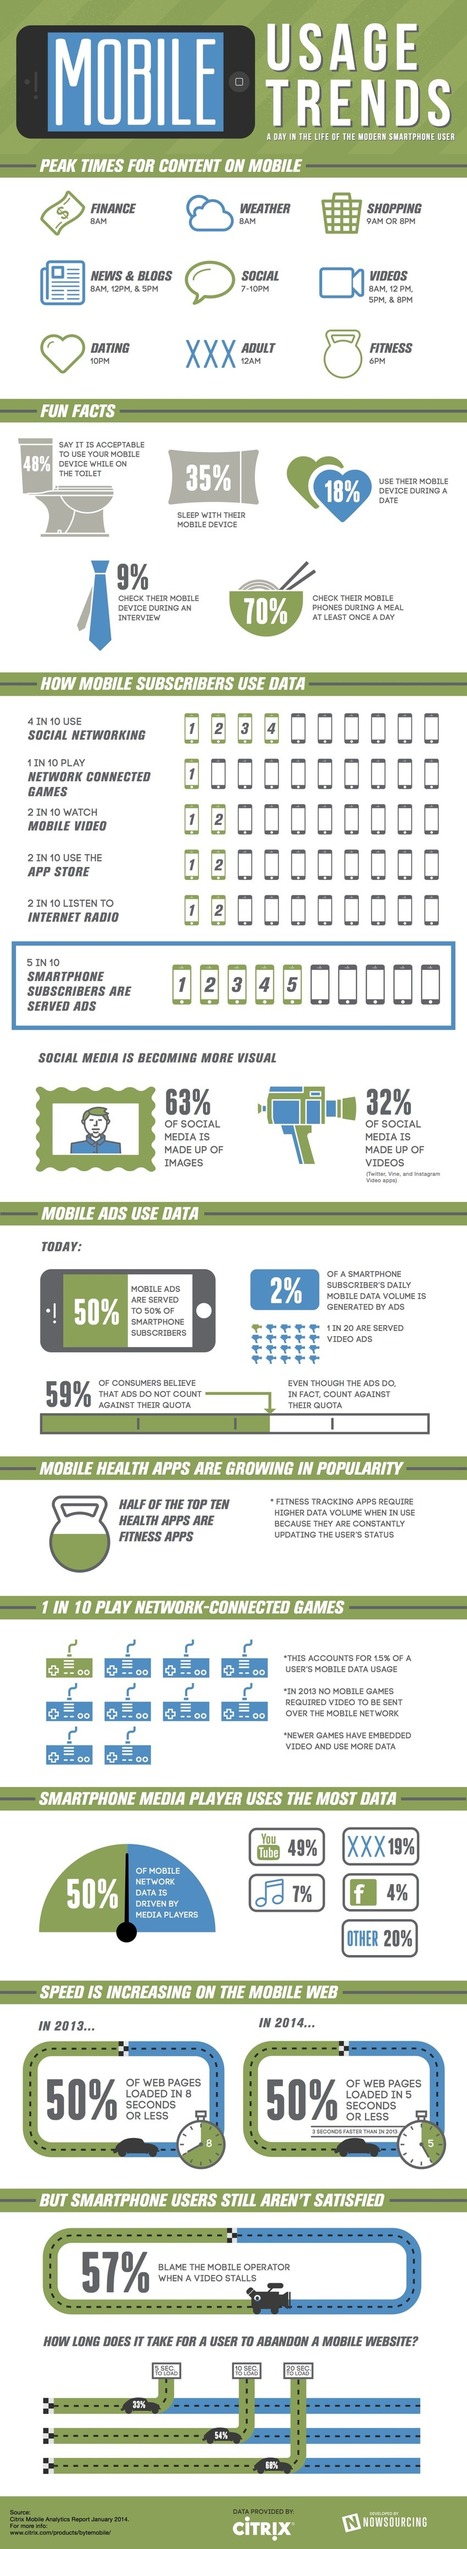 A Day in the Life of the Modern Smartphone User [Infographic] | Information Technology & Social Media News | Scoop.it